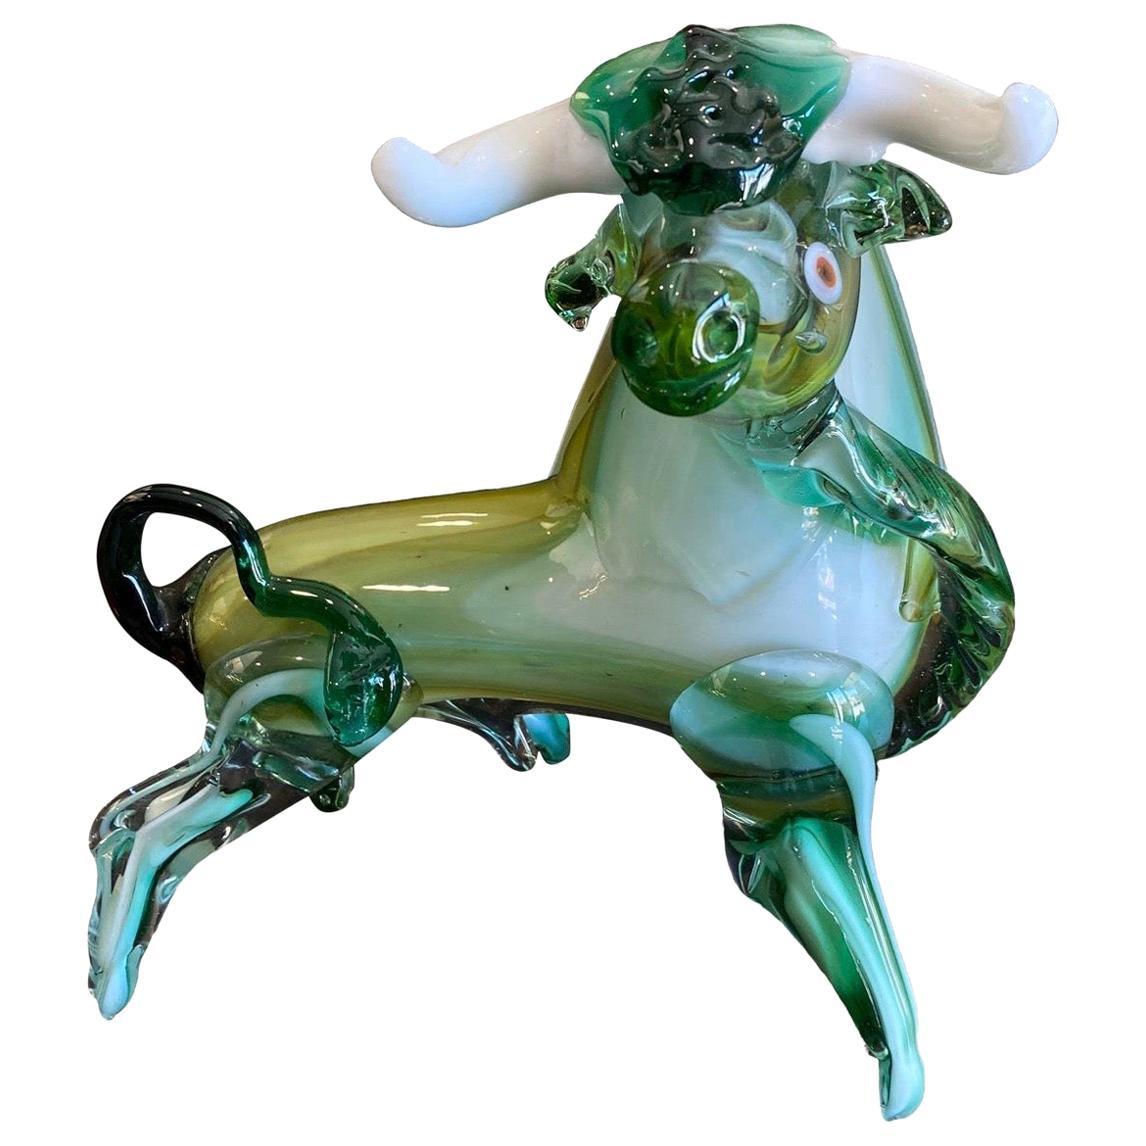 Murano Glass Sculpture of Green Bull, Made in Italy